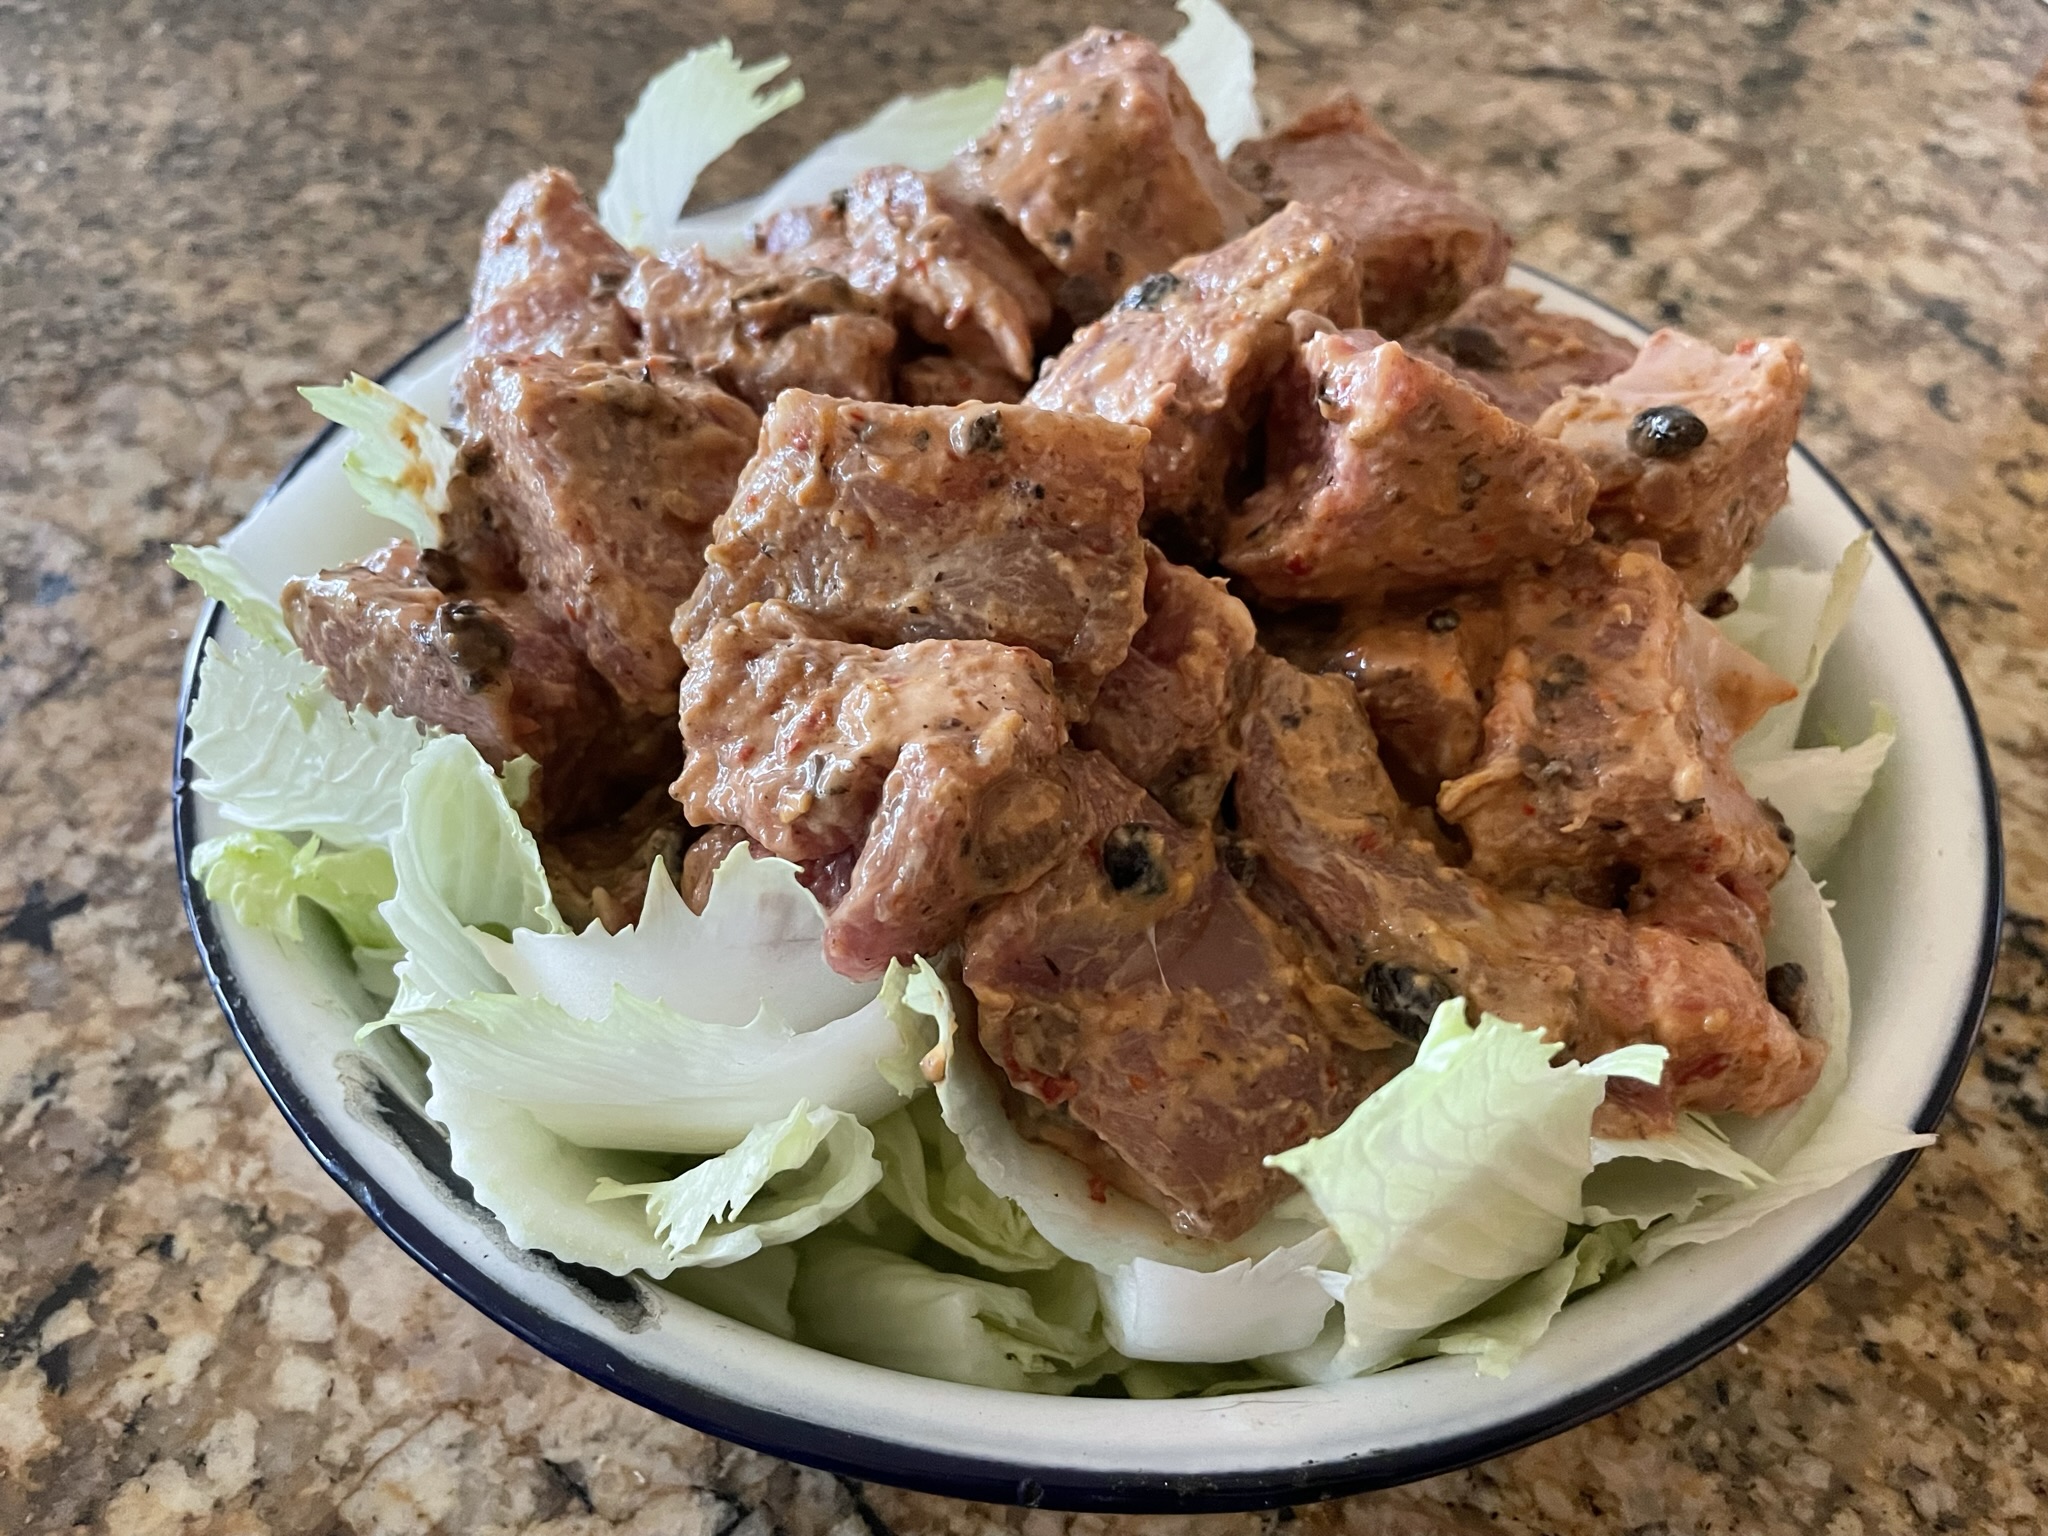 Place marinated pork ribs on top of napa cabbage pieces.